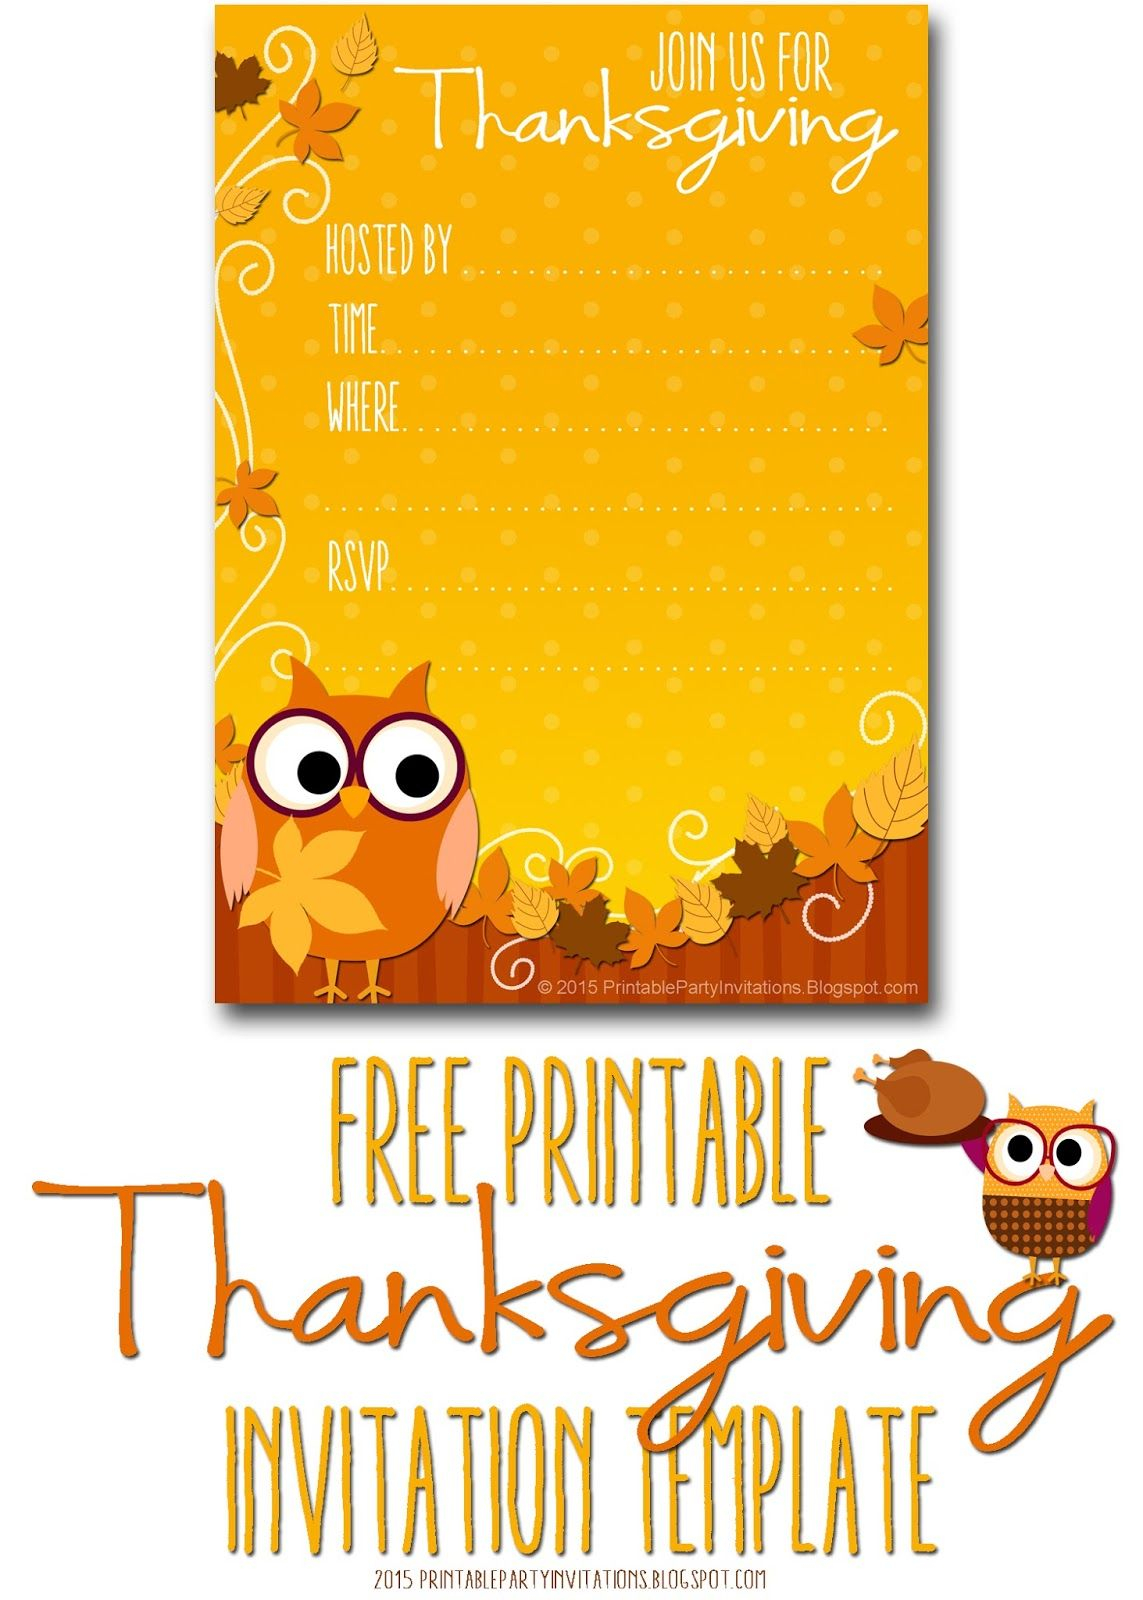 009 Thanksgiving Dinner Invitation Template Impressive Ideas Family in proportions 1143 X 1600